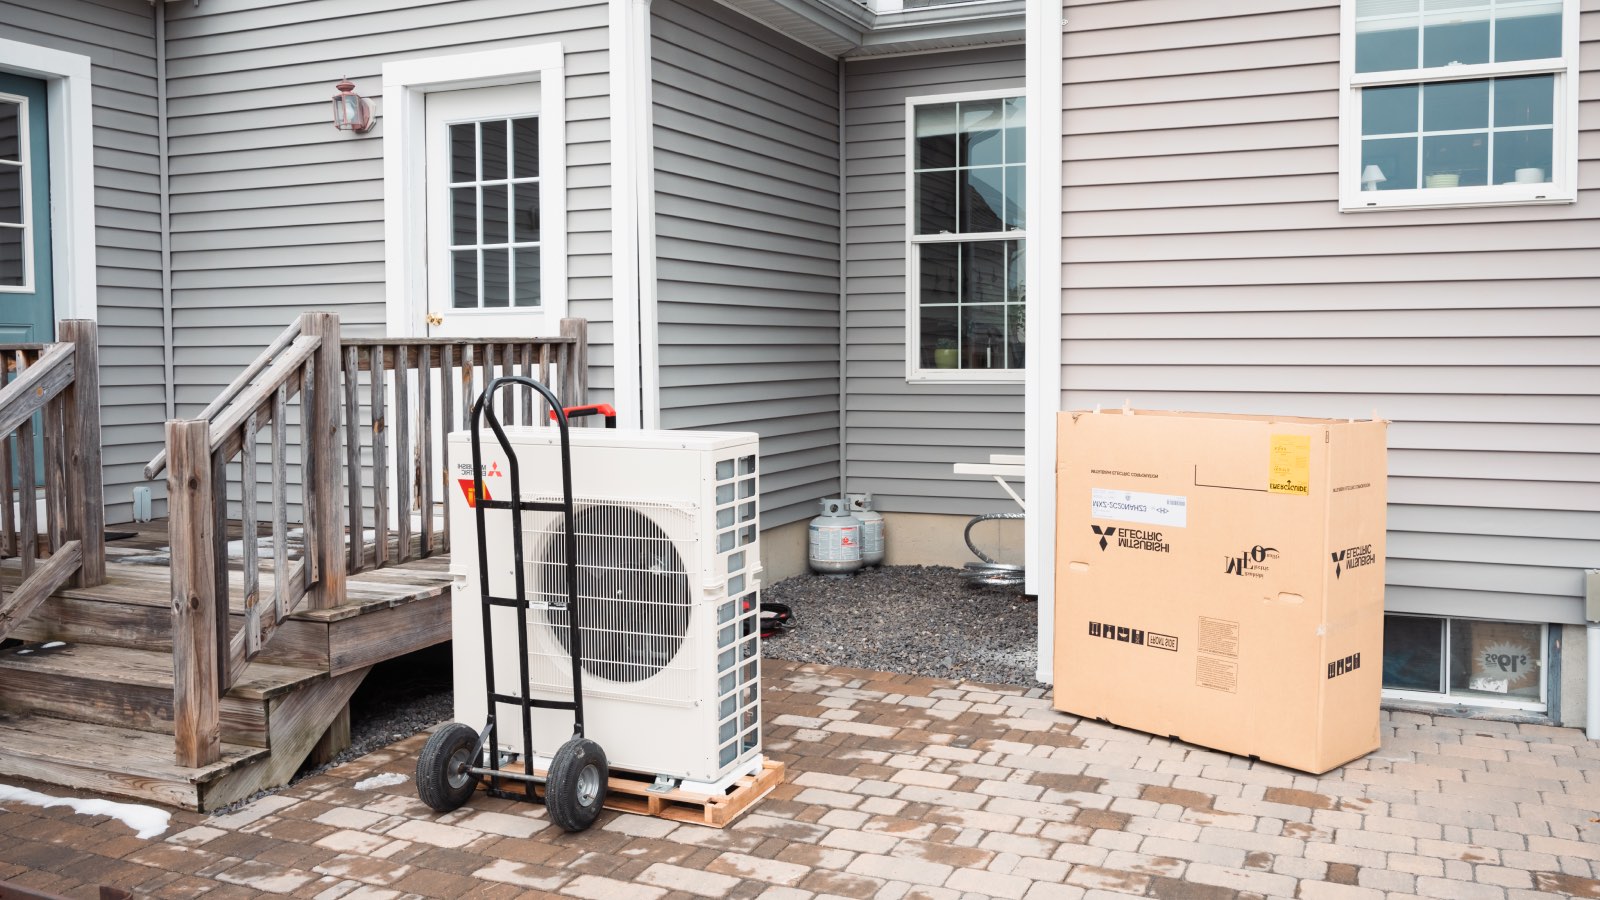 A new heat pump sits ready to be installed at a home in Windham, Maine, in January 2023.